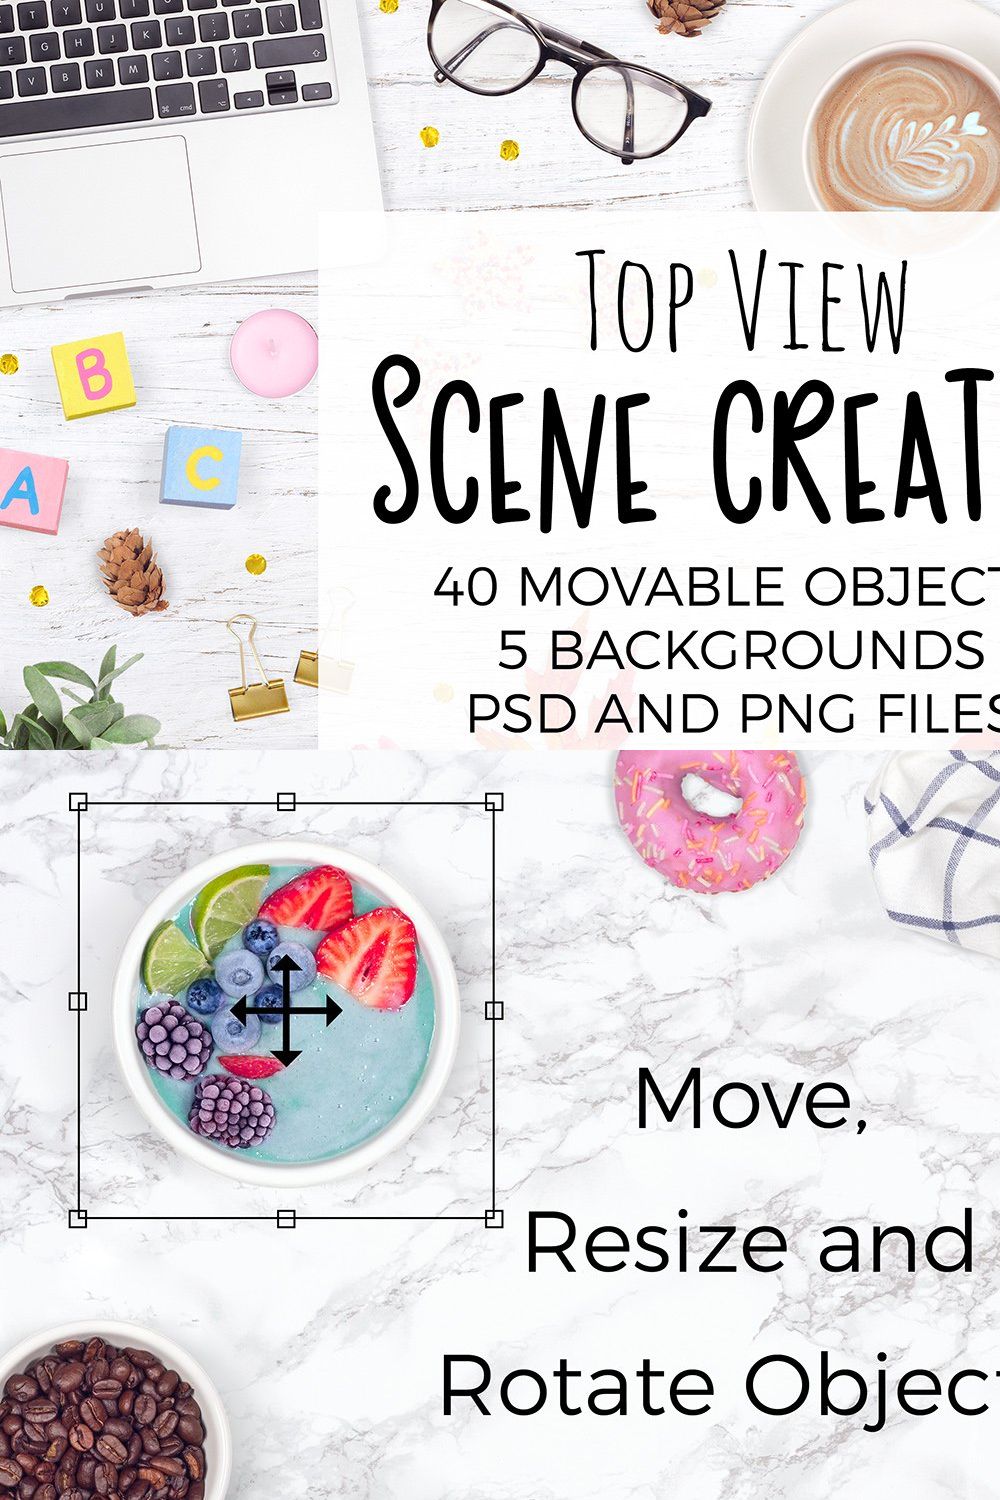 Scene Creator Top View pinterest preview image.